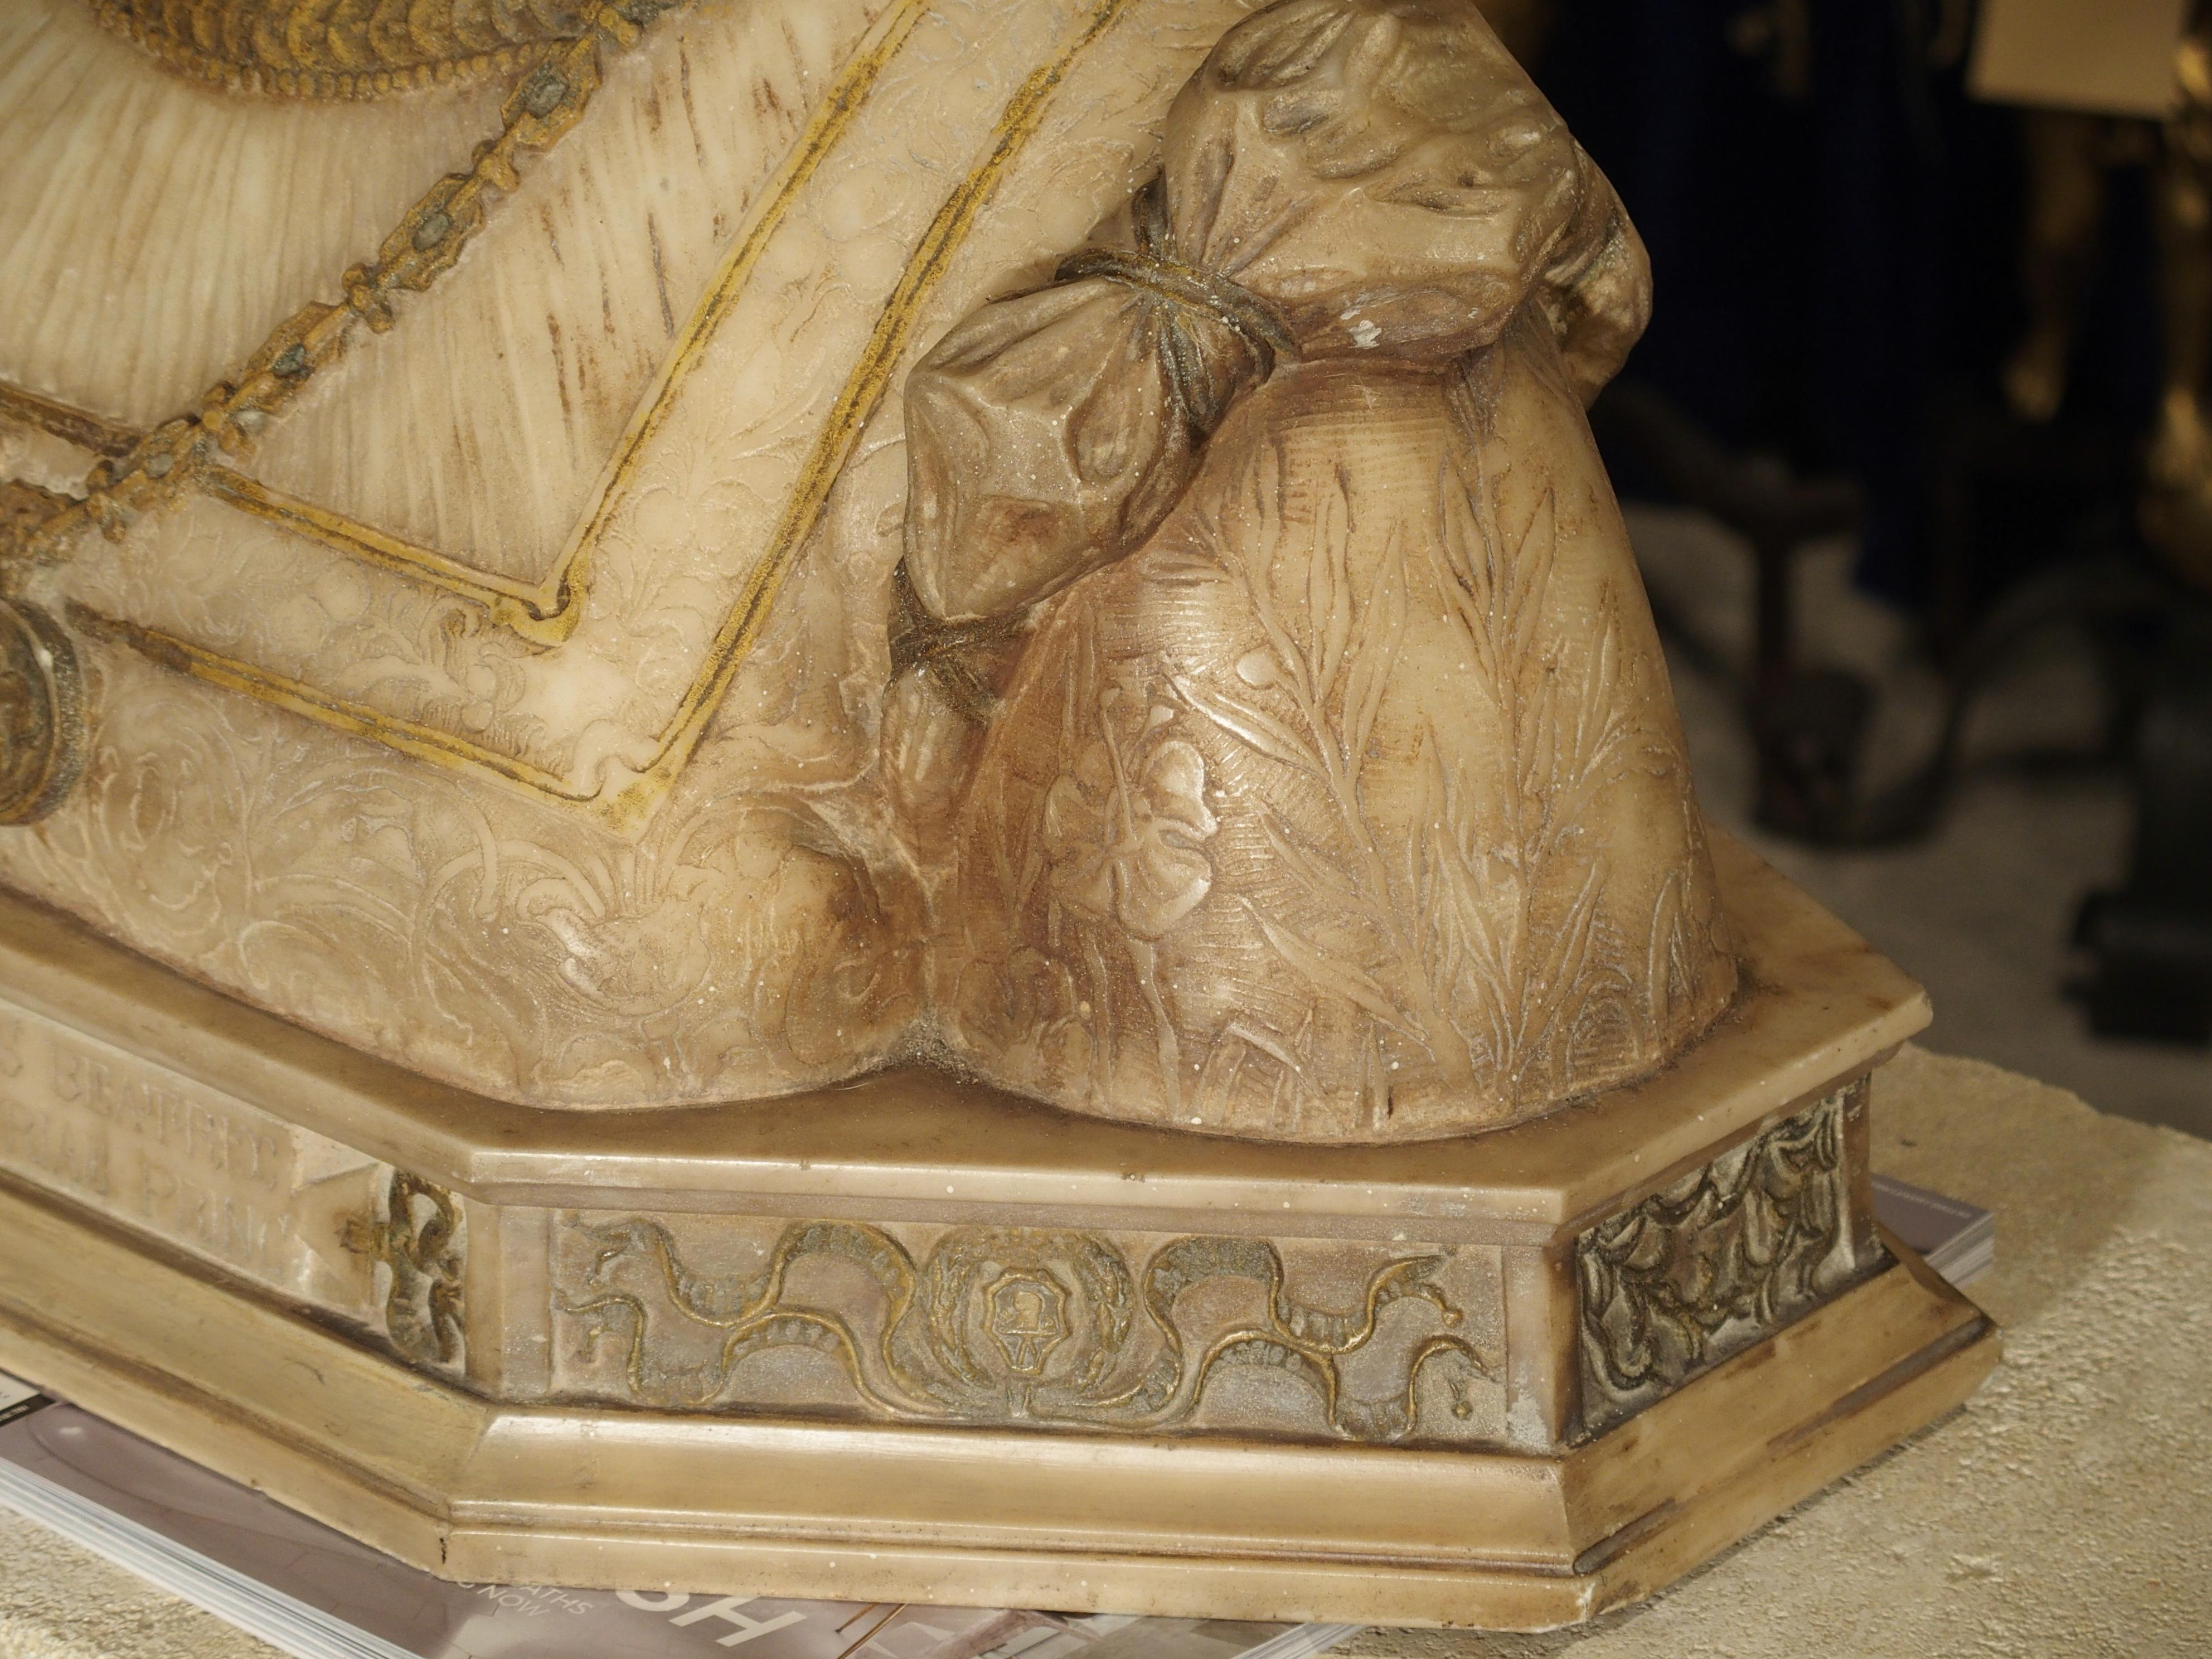 19th Century Antique Italian Alabaster Bust of the Grand Princess of Tuscany, circa 1890